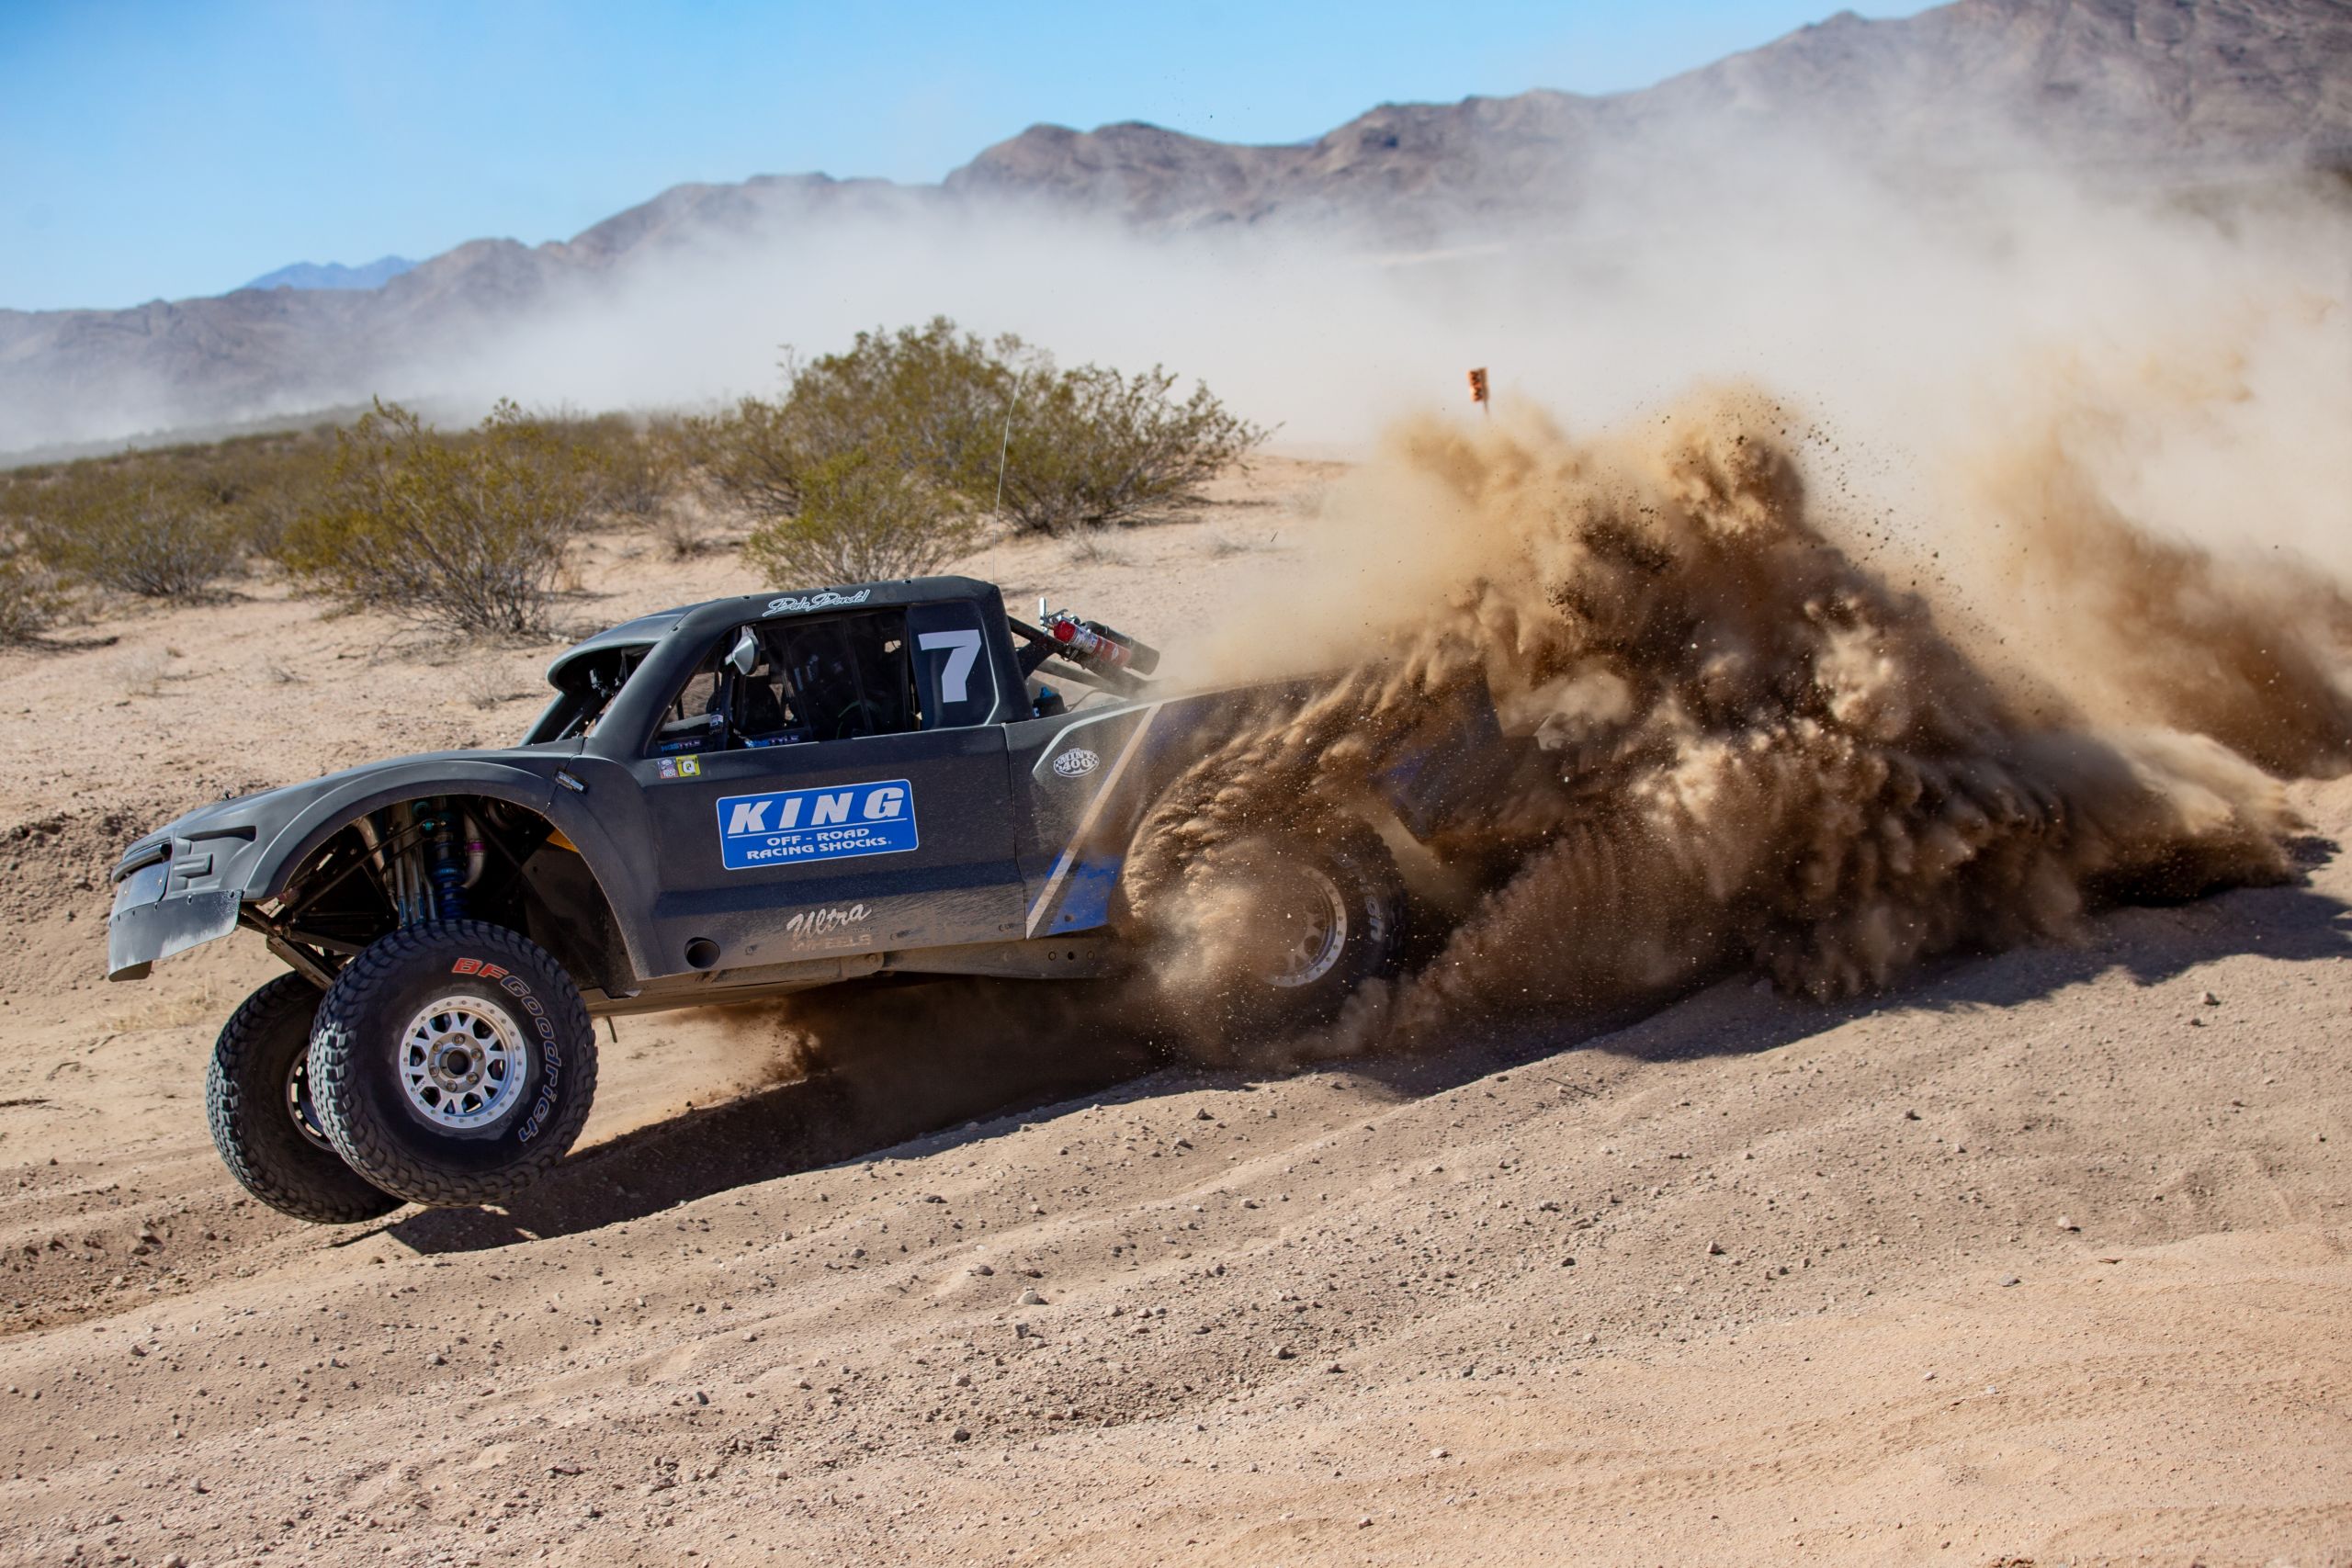 The 2022 California 300 off-road race debuts in Barstow, CA